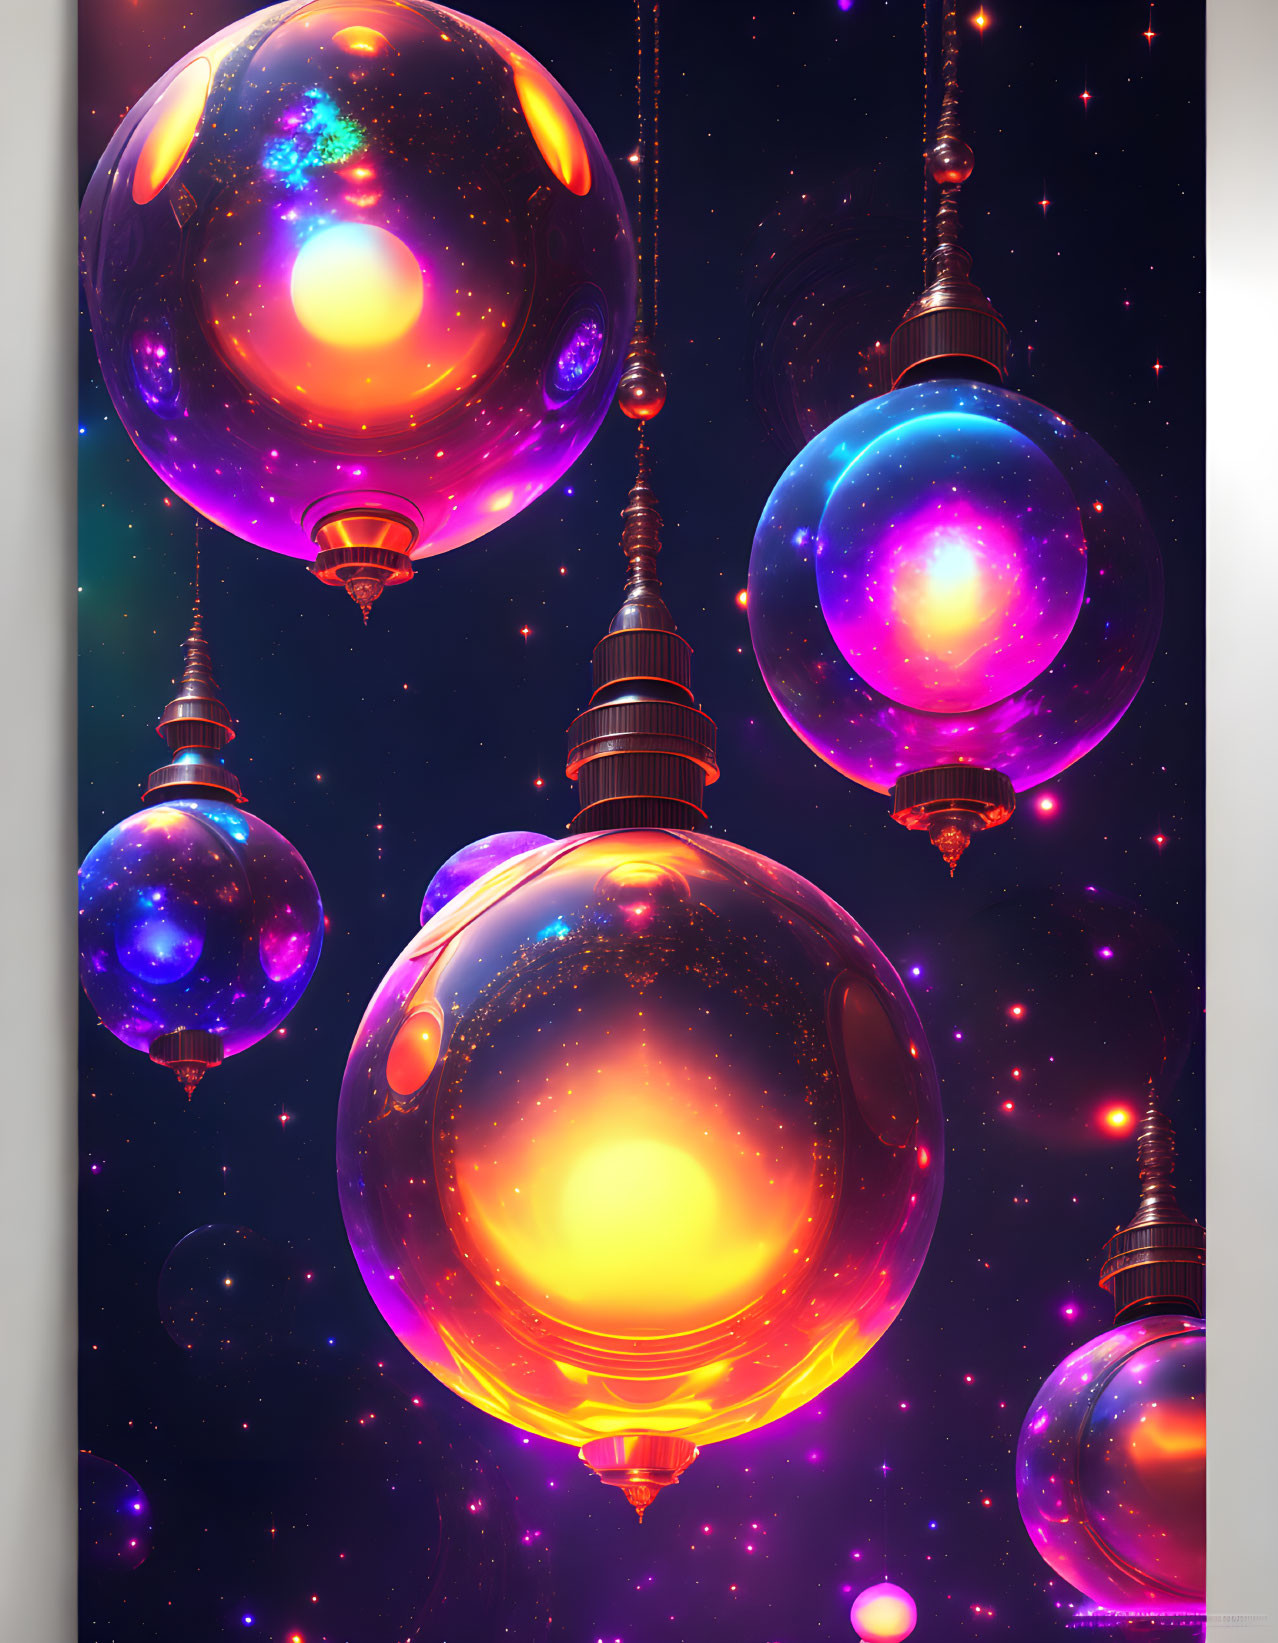 Colorful cosmic spheres with glowing centers in a starry setting and ornate fixtures.